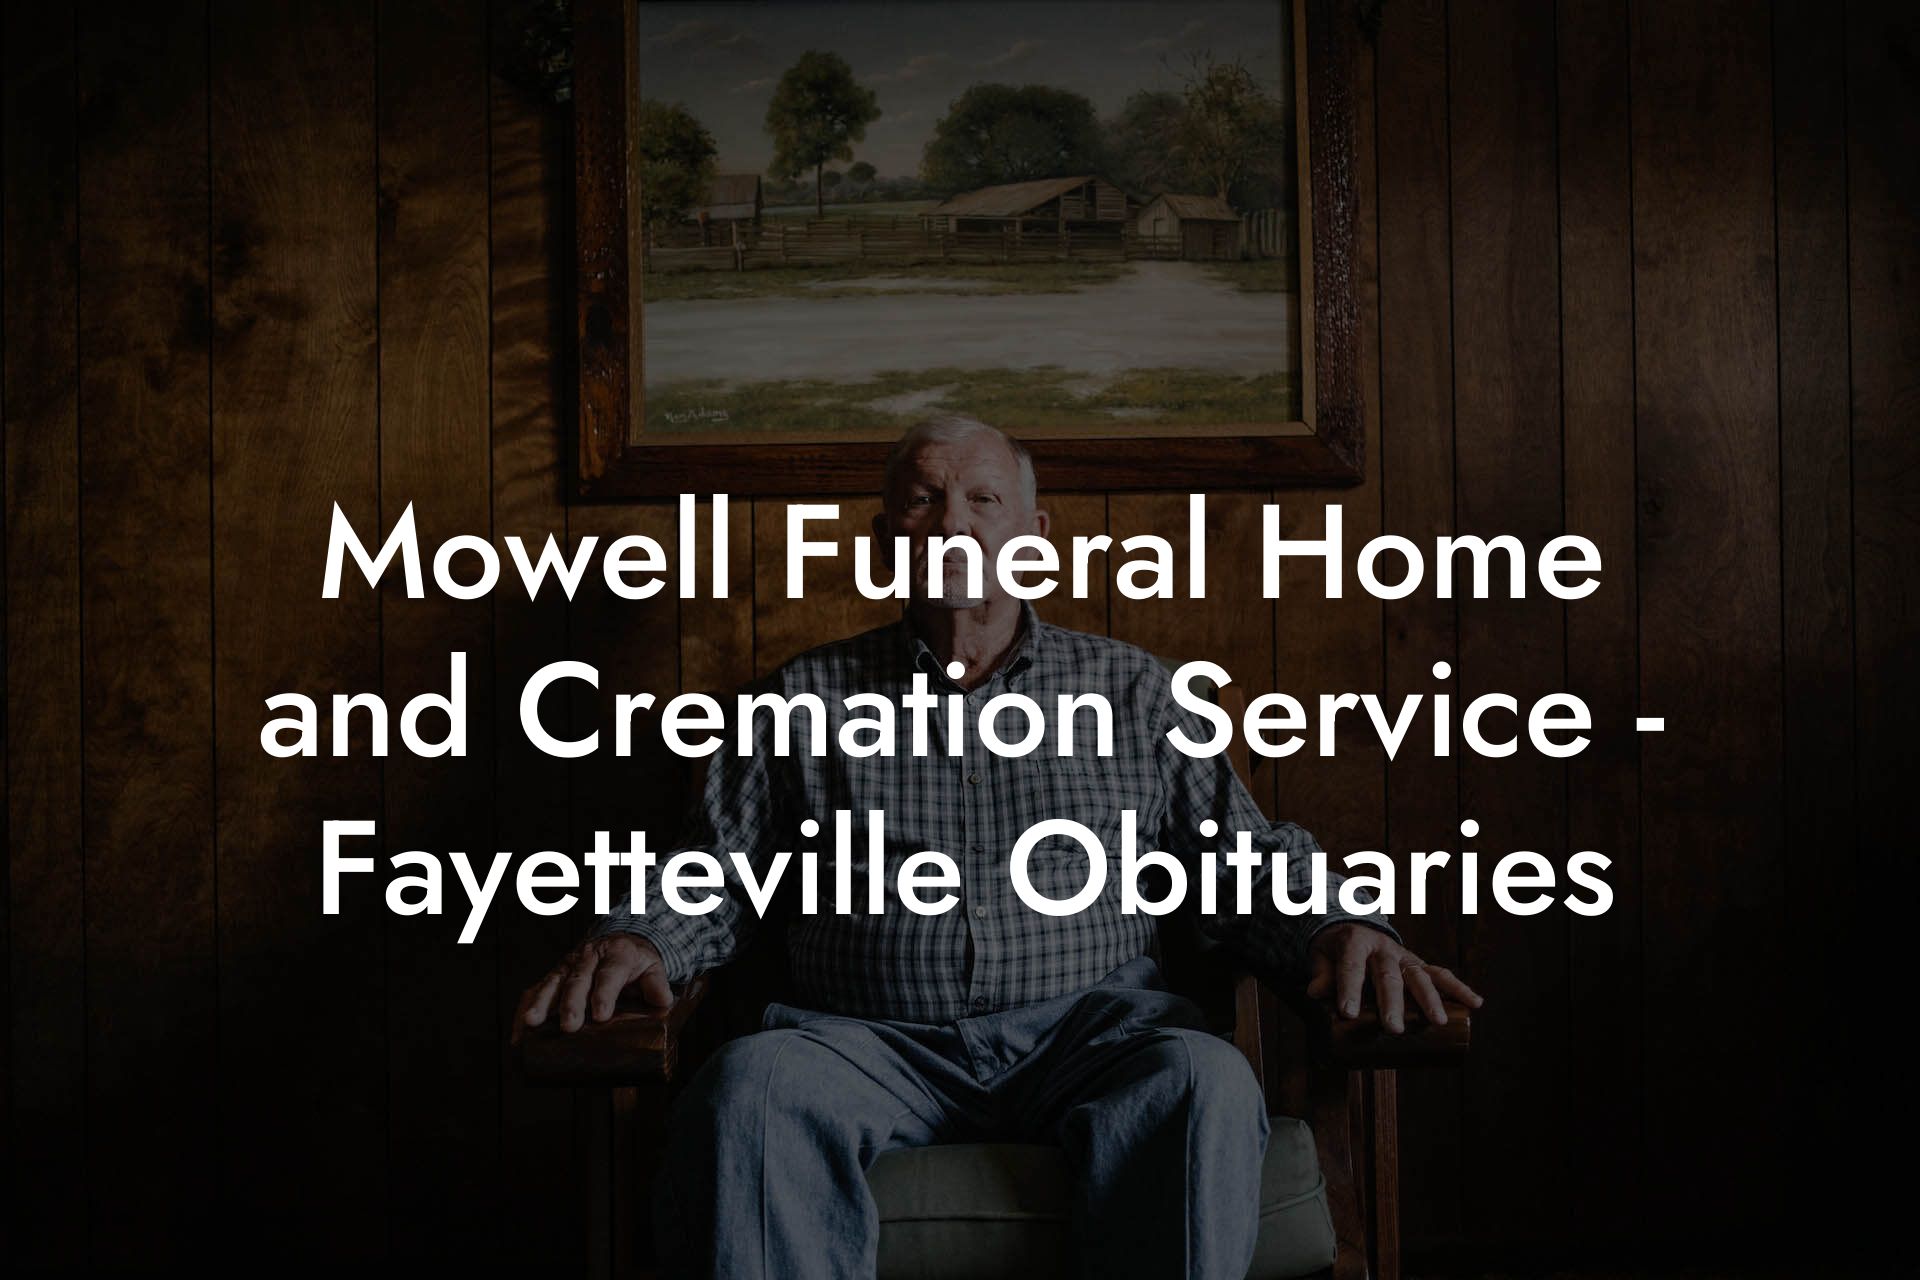 Mowell Funeral Home and Cremation Service - Fayetteville Obituaries